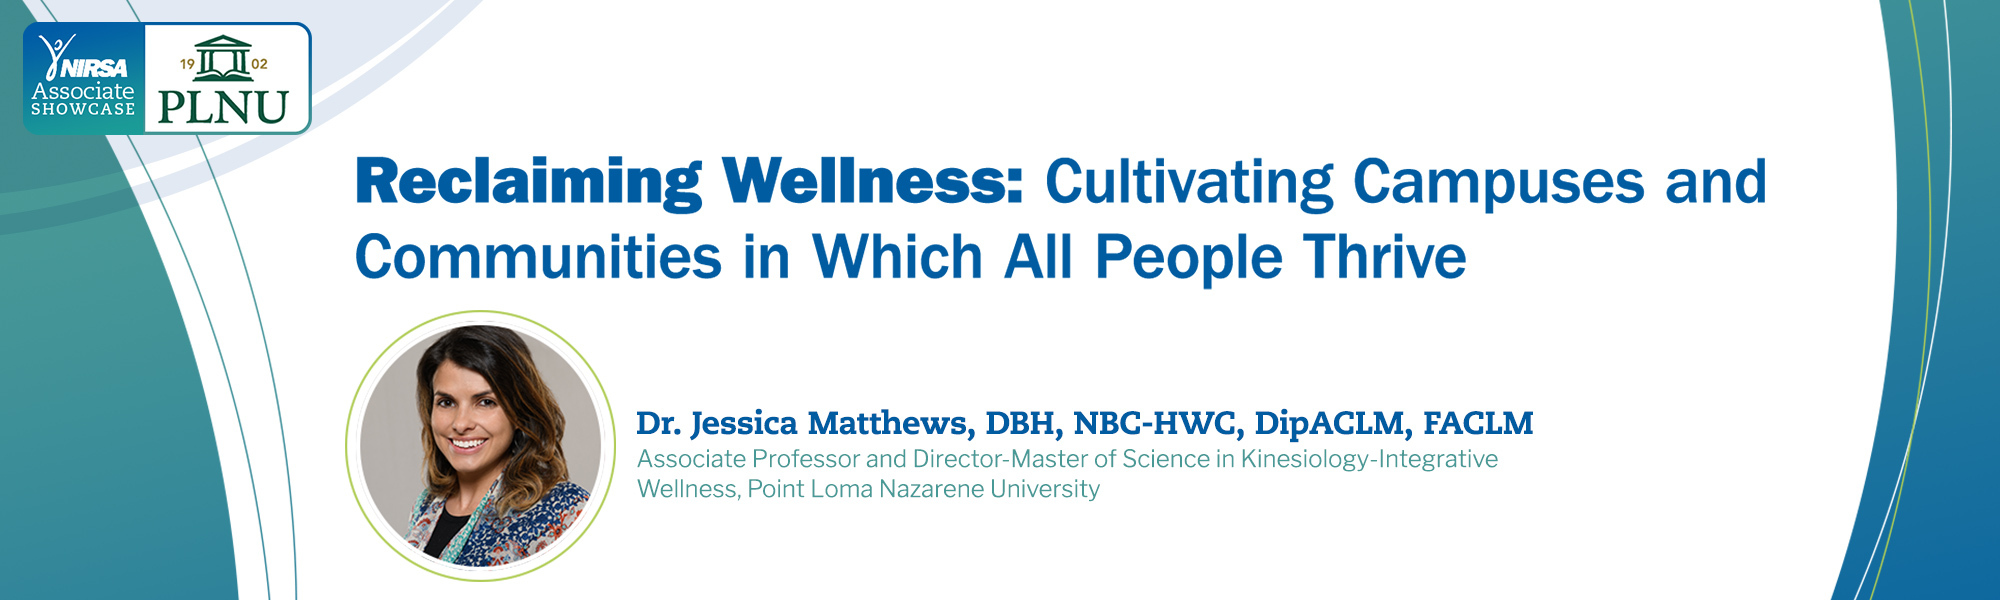 Reclaiming Wellness: Cultivating Campuses and Communities in Which All People Thrive